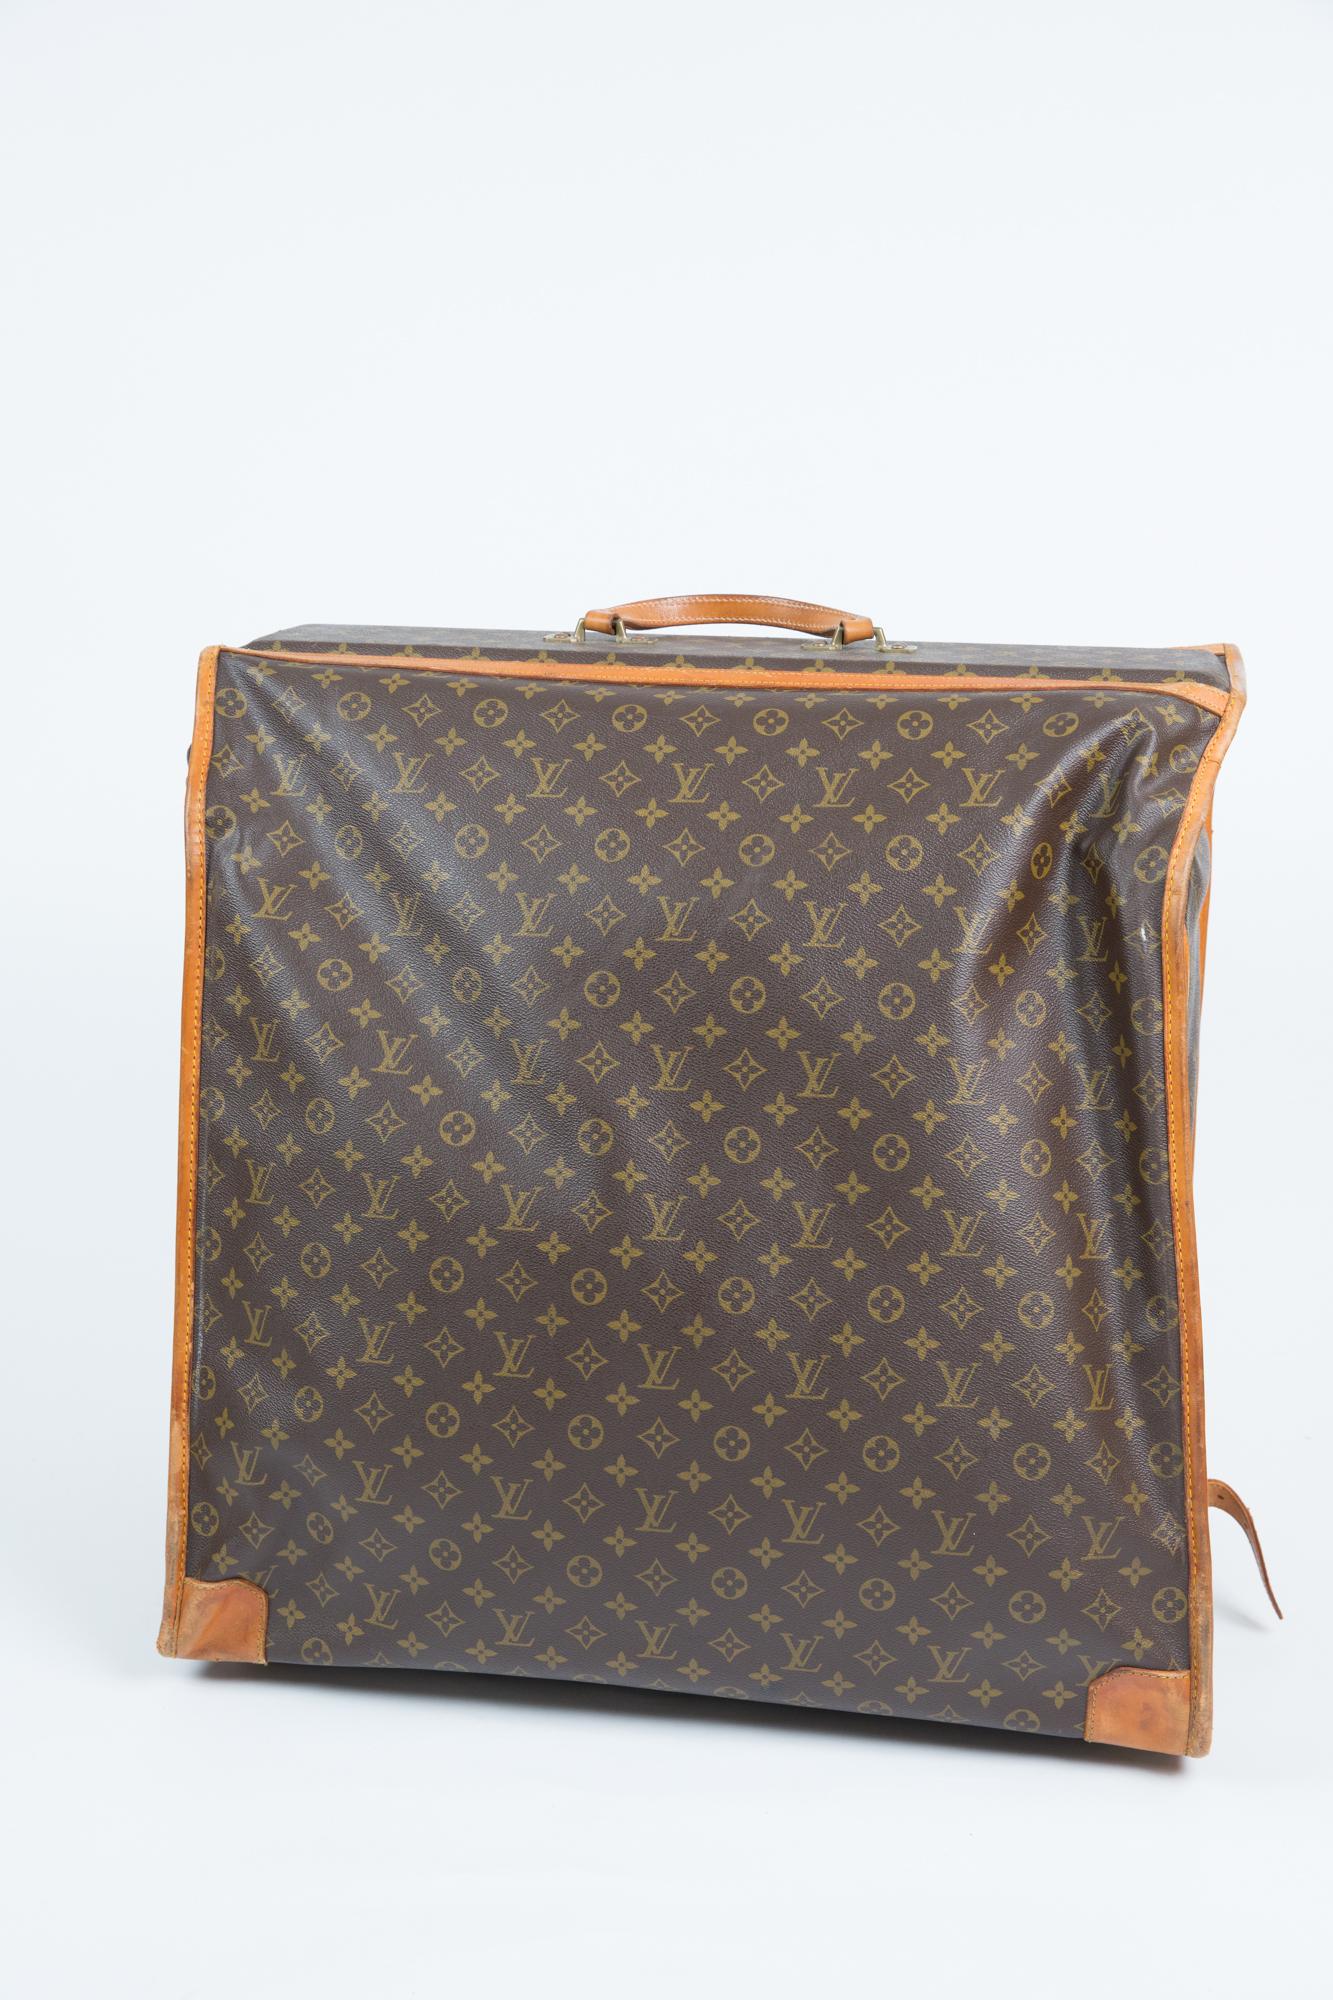 Louis Vuitton brown Monogram clothes-hangers luggage featuring a monogram canvas and natural leather, hardware in gilt metal, simple handle in leather allowing the bag to be worn in the hand, zip closure and swirling fastener.
One large zip pocket